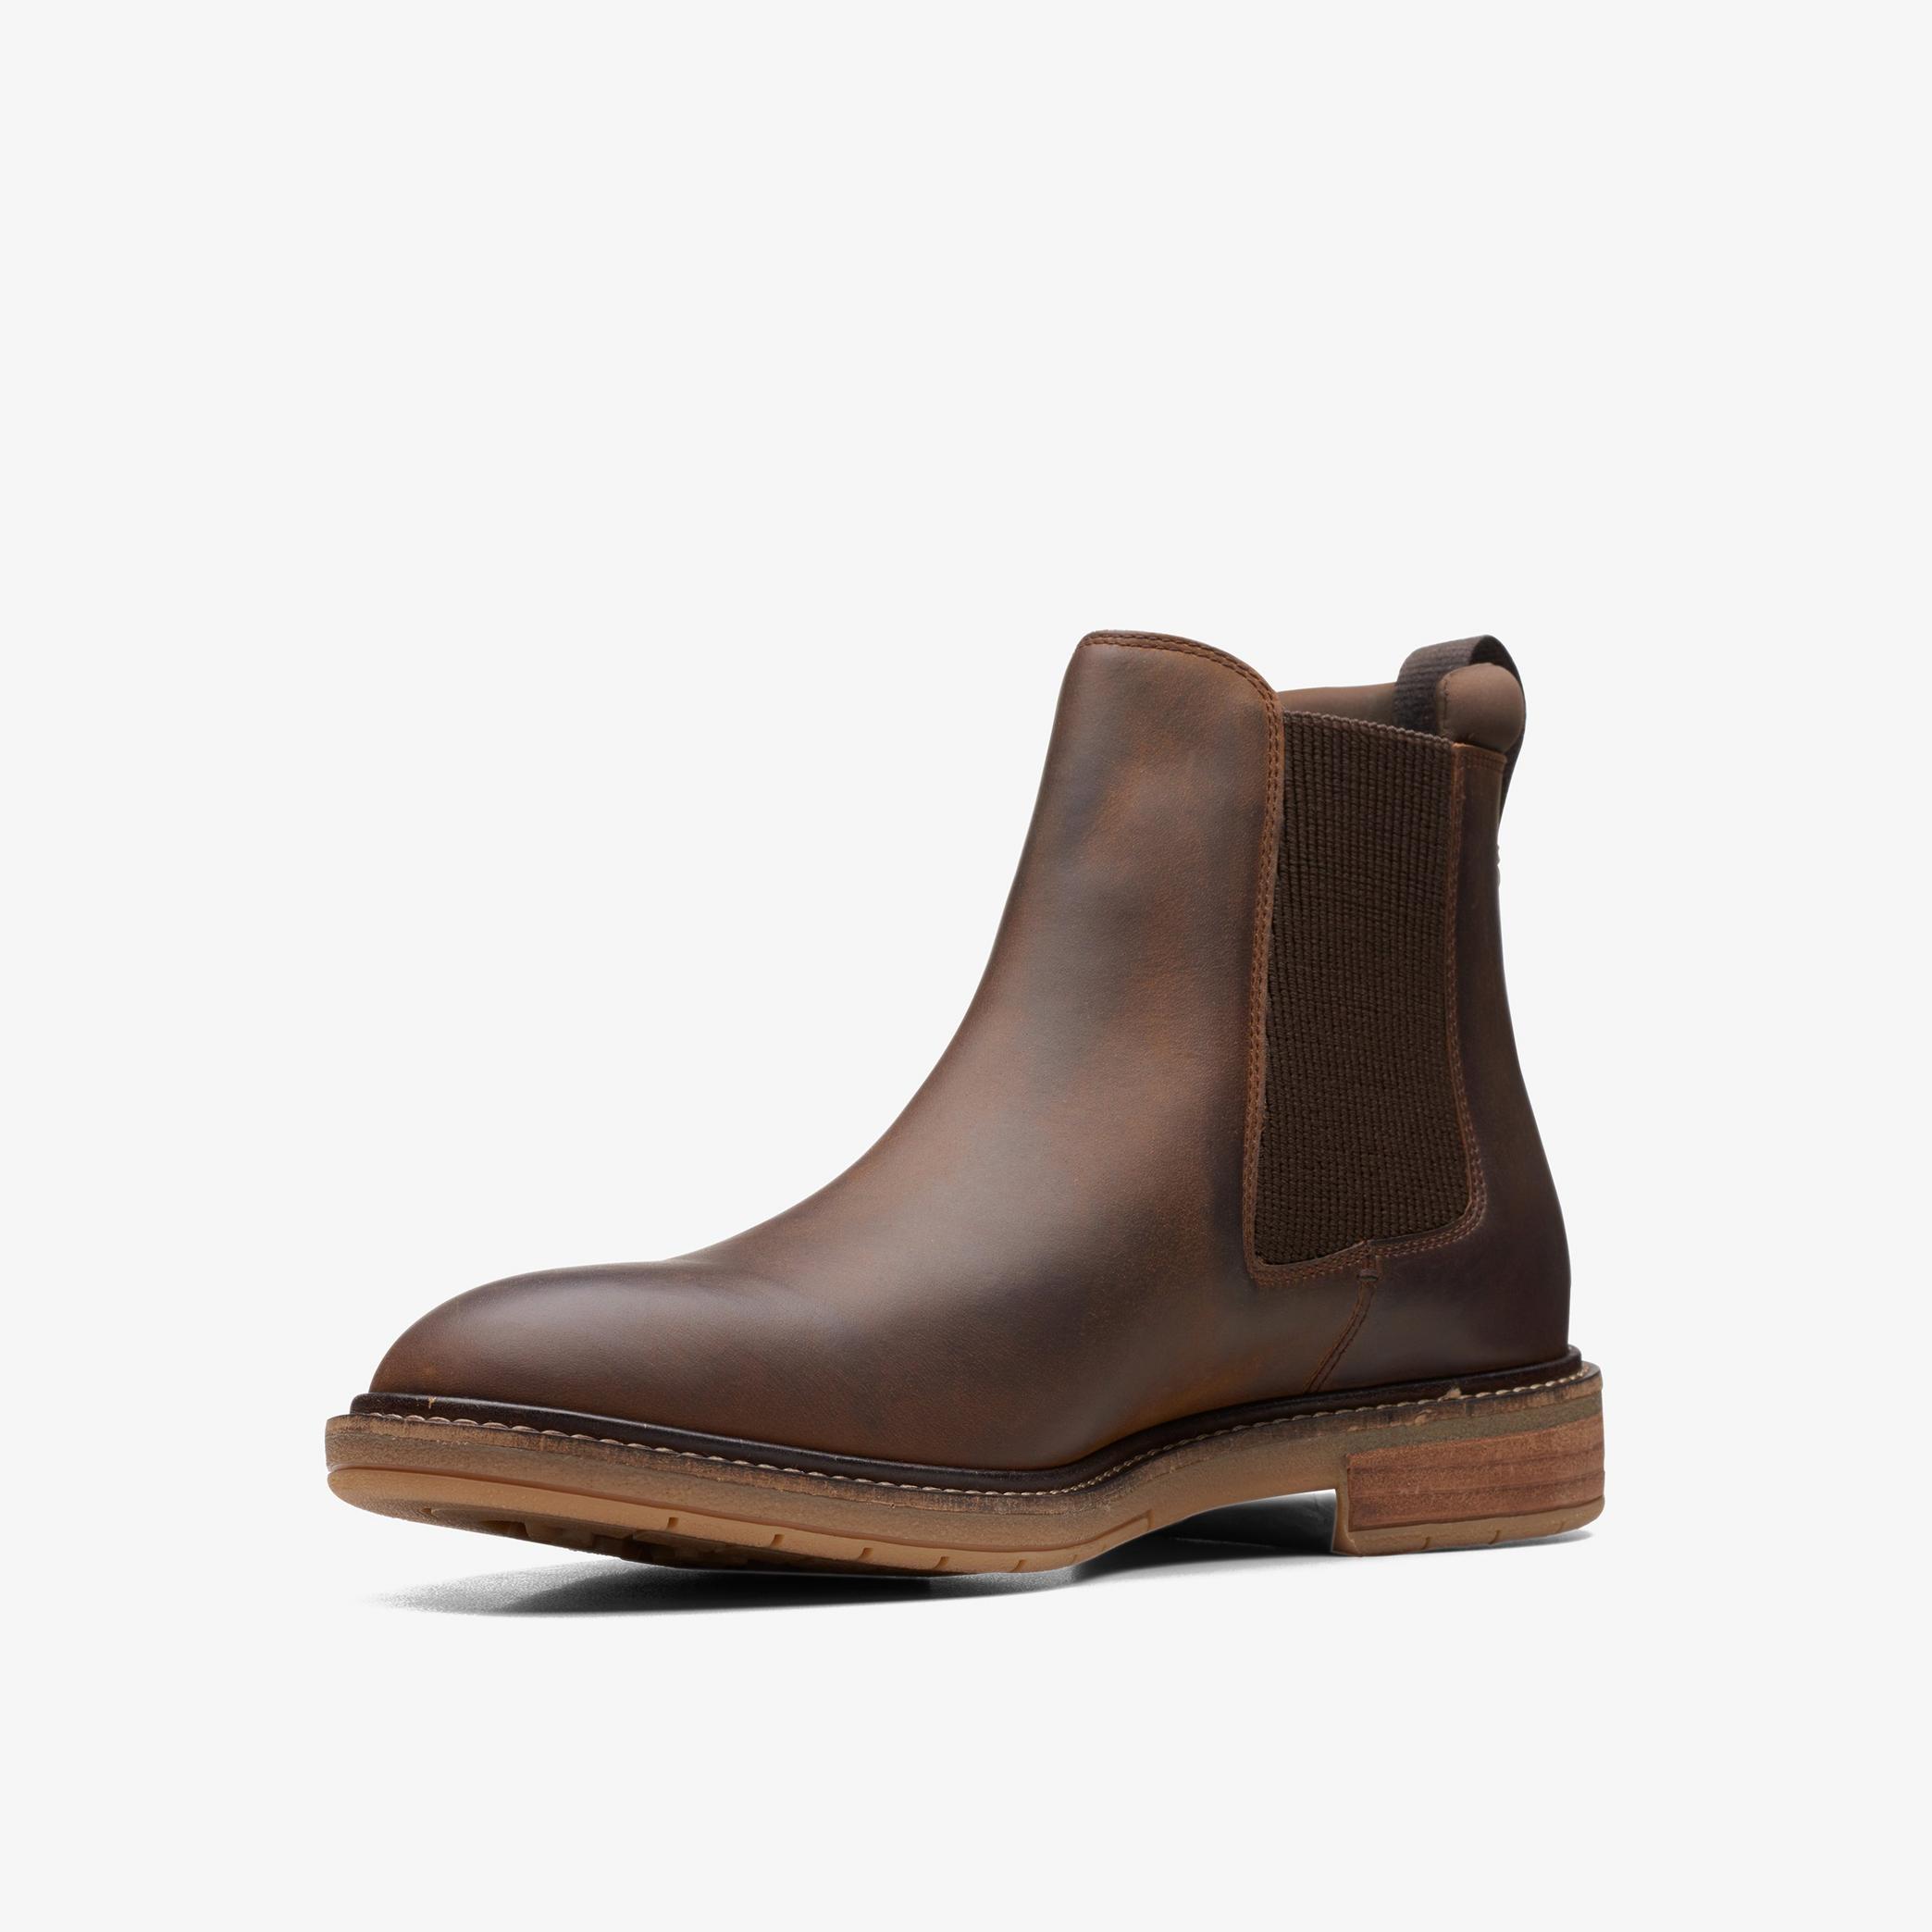 Clarkdale Hall Beeswax Leather Chelsea Boots, view 4 of 6